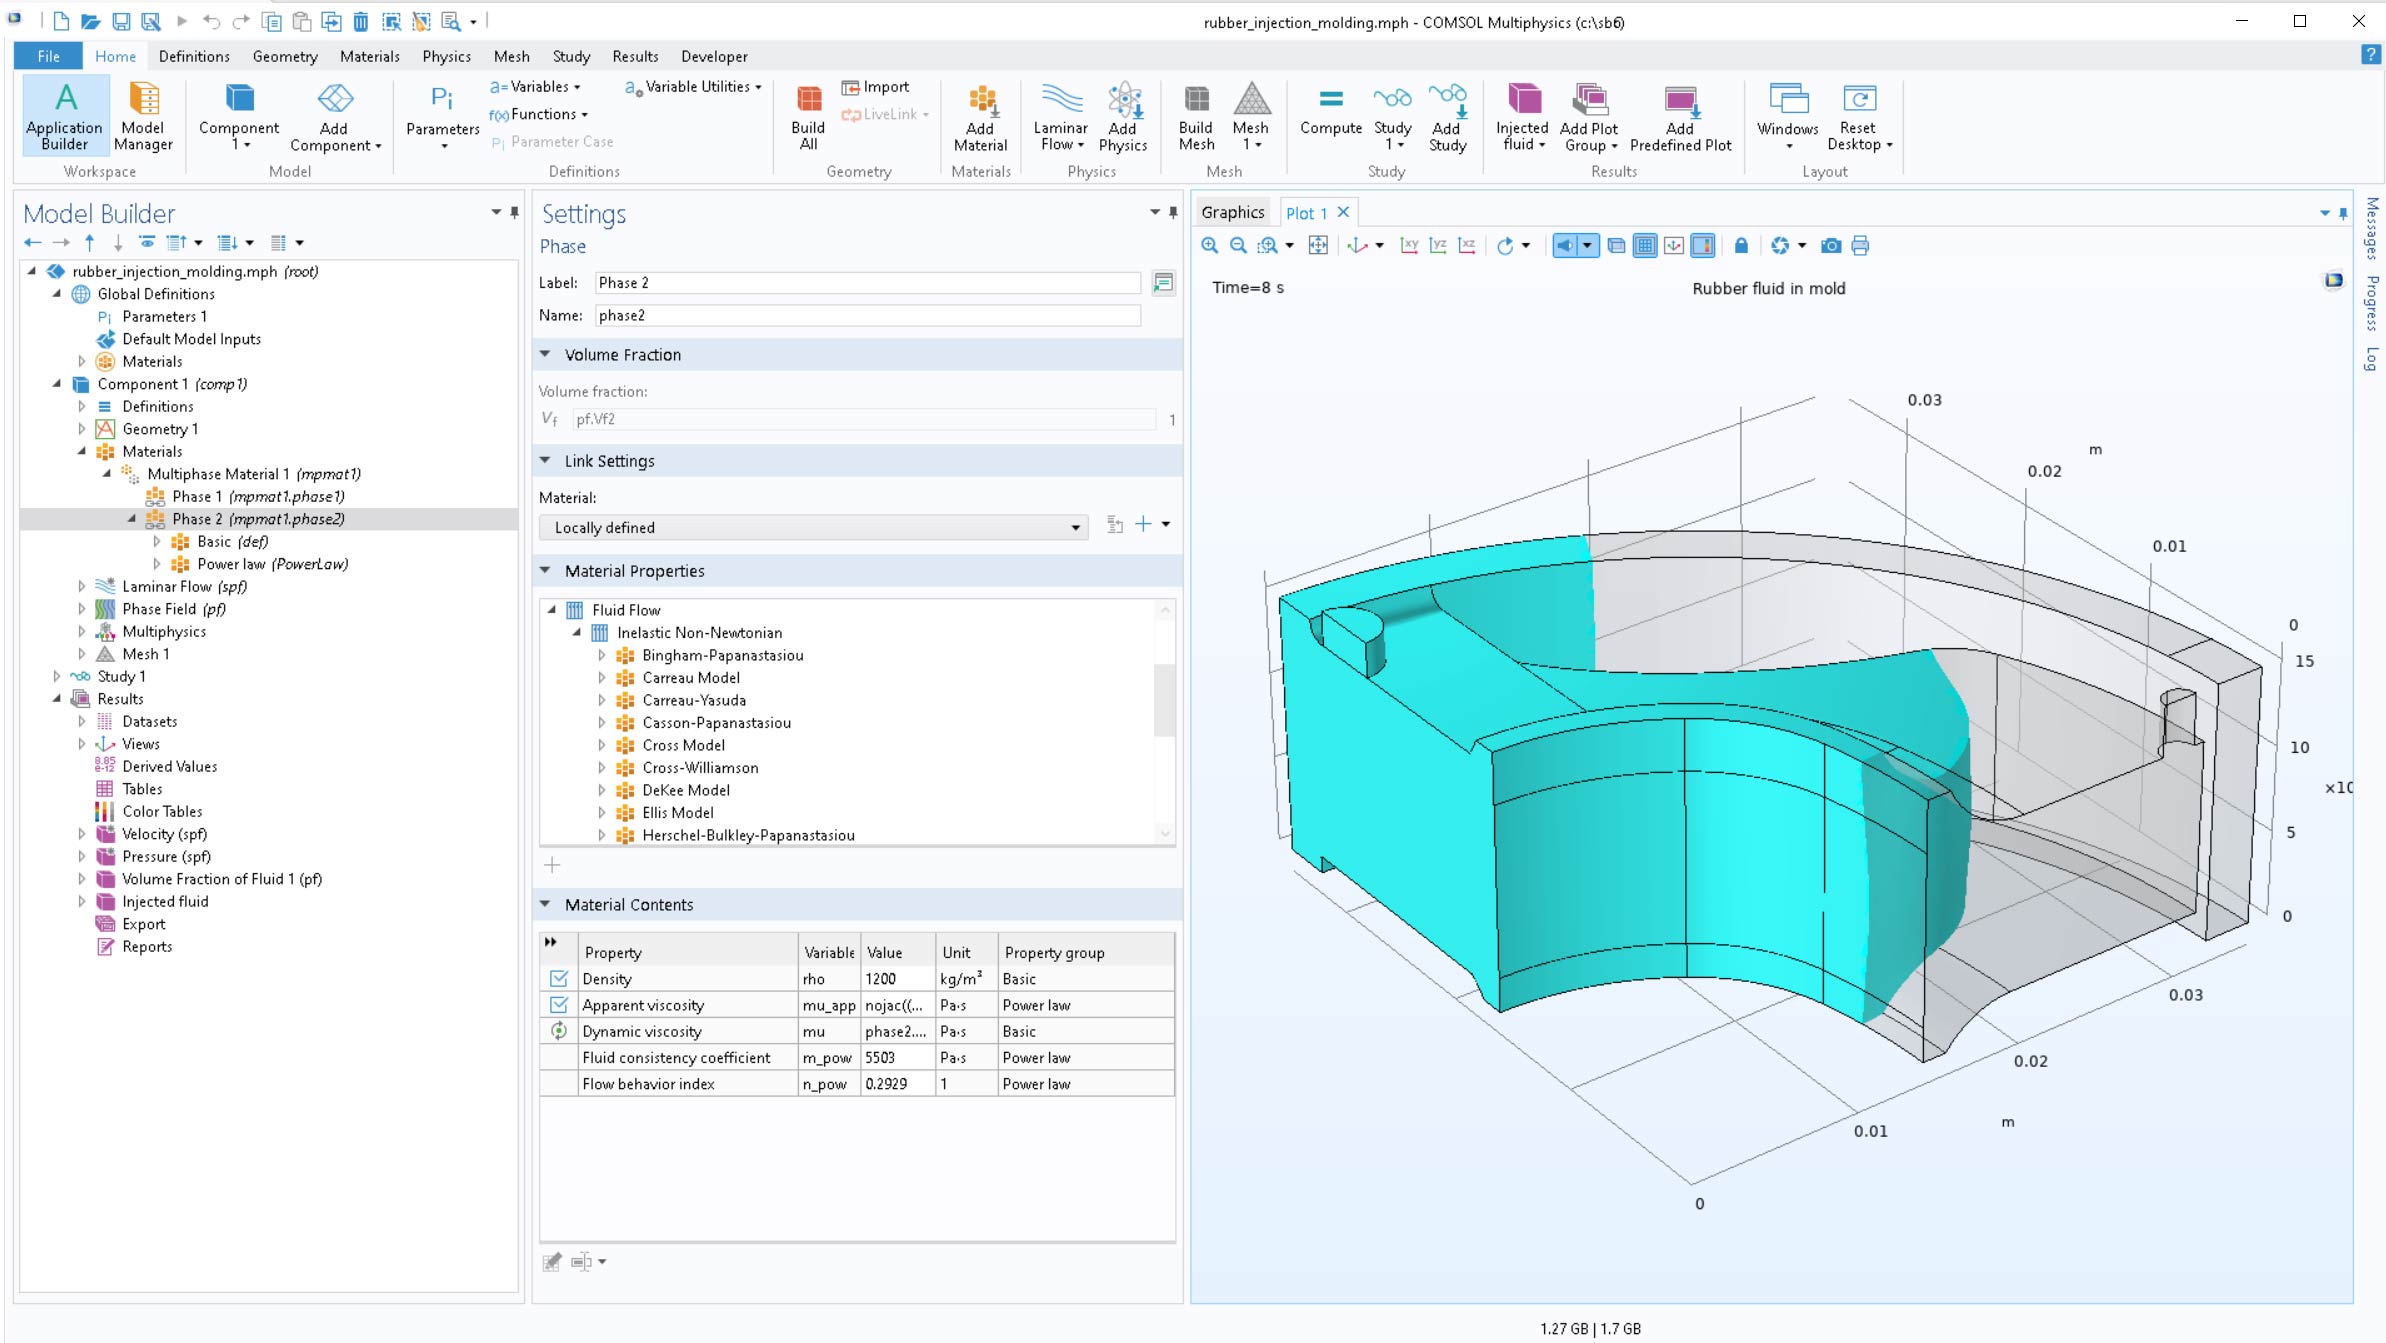 The COMSOL Multiphysics UI showing the Model Builder with the Phase 2 material selected, the corresponding Settings window, and the Graphics window showing the Rubber Injection Molding model.